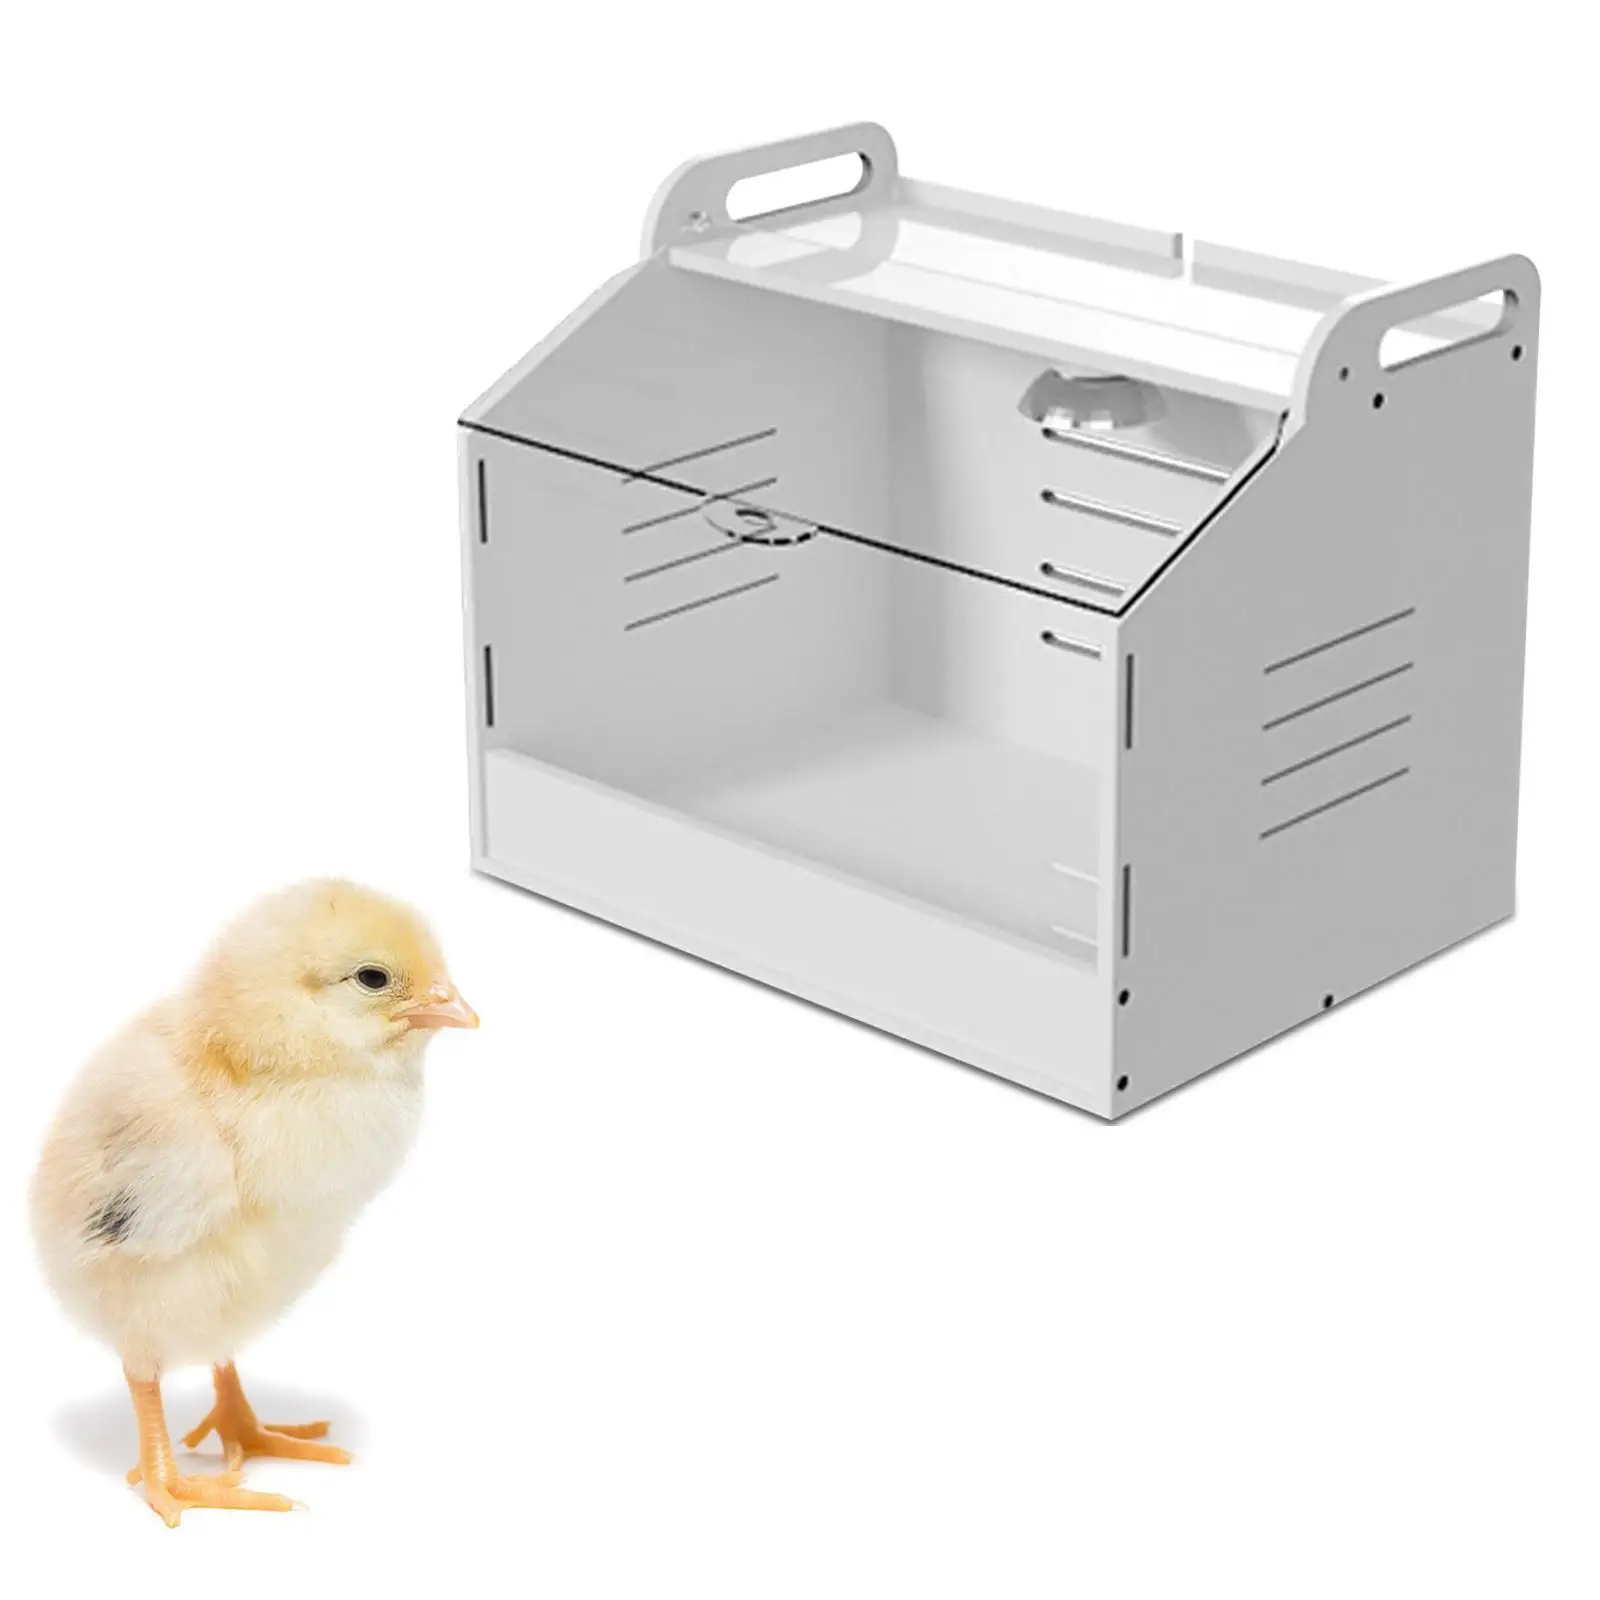 Egg Incubator Hatching DIY Assembly Easy to Clean Automatic Poultry Hatcher Machine for Eggs